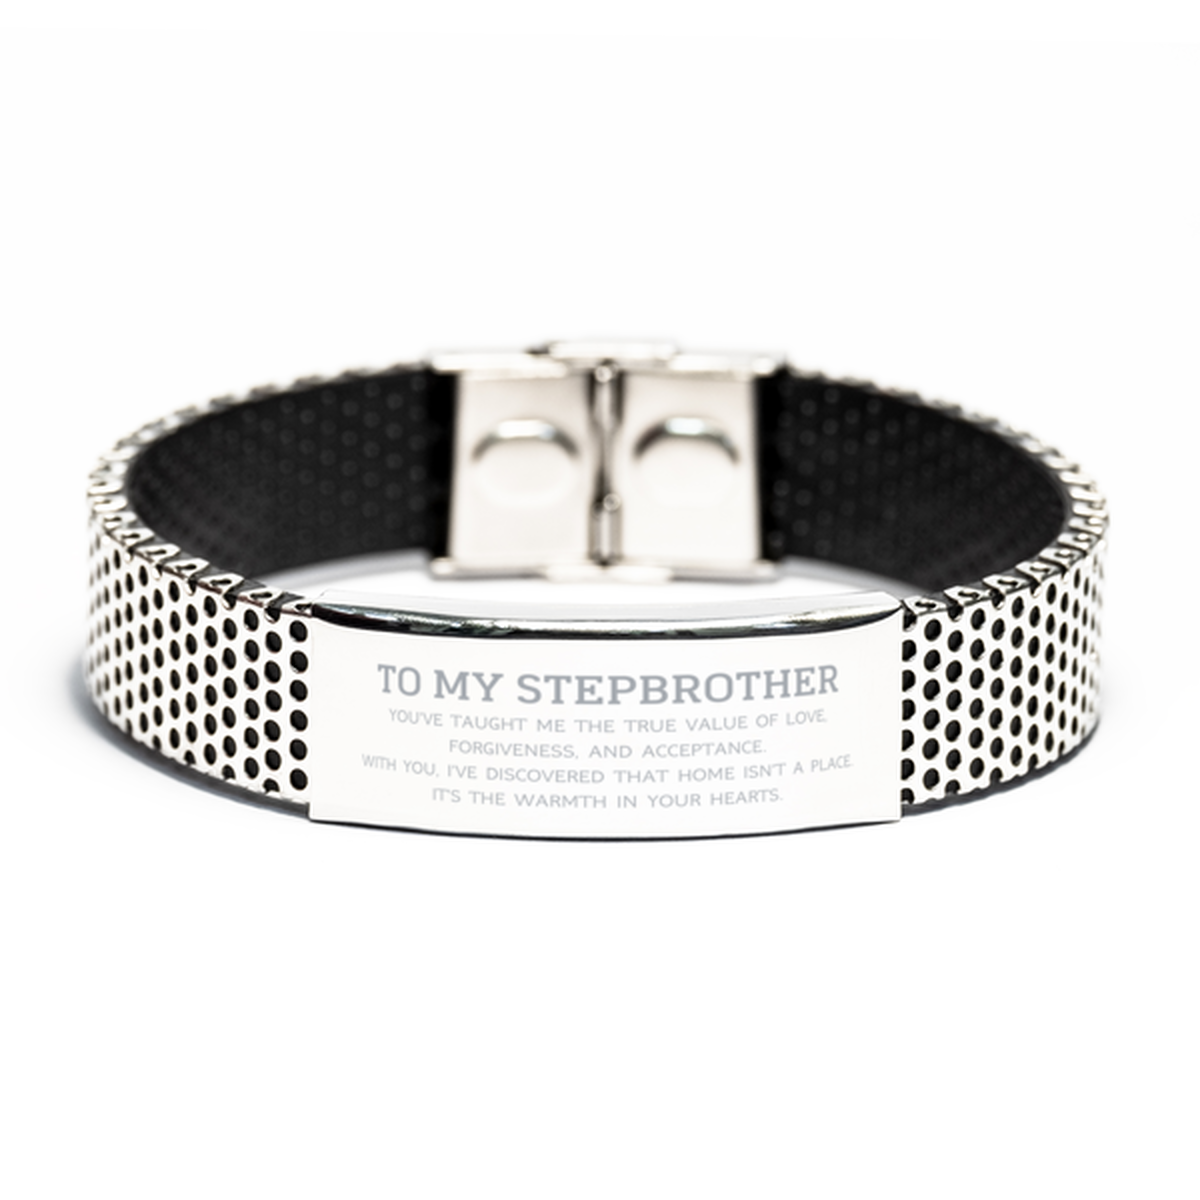 To My Stepbrother Gifts, You've taught me the true value of love, Thank You Gifts For Stepbrother, Birthday Stainless Steel Bracelet For Stepbrother